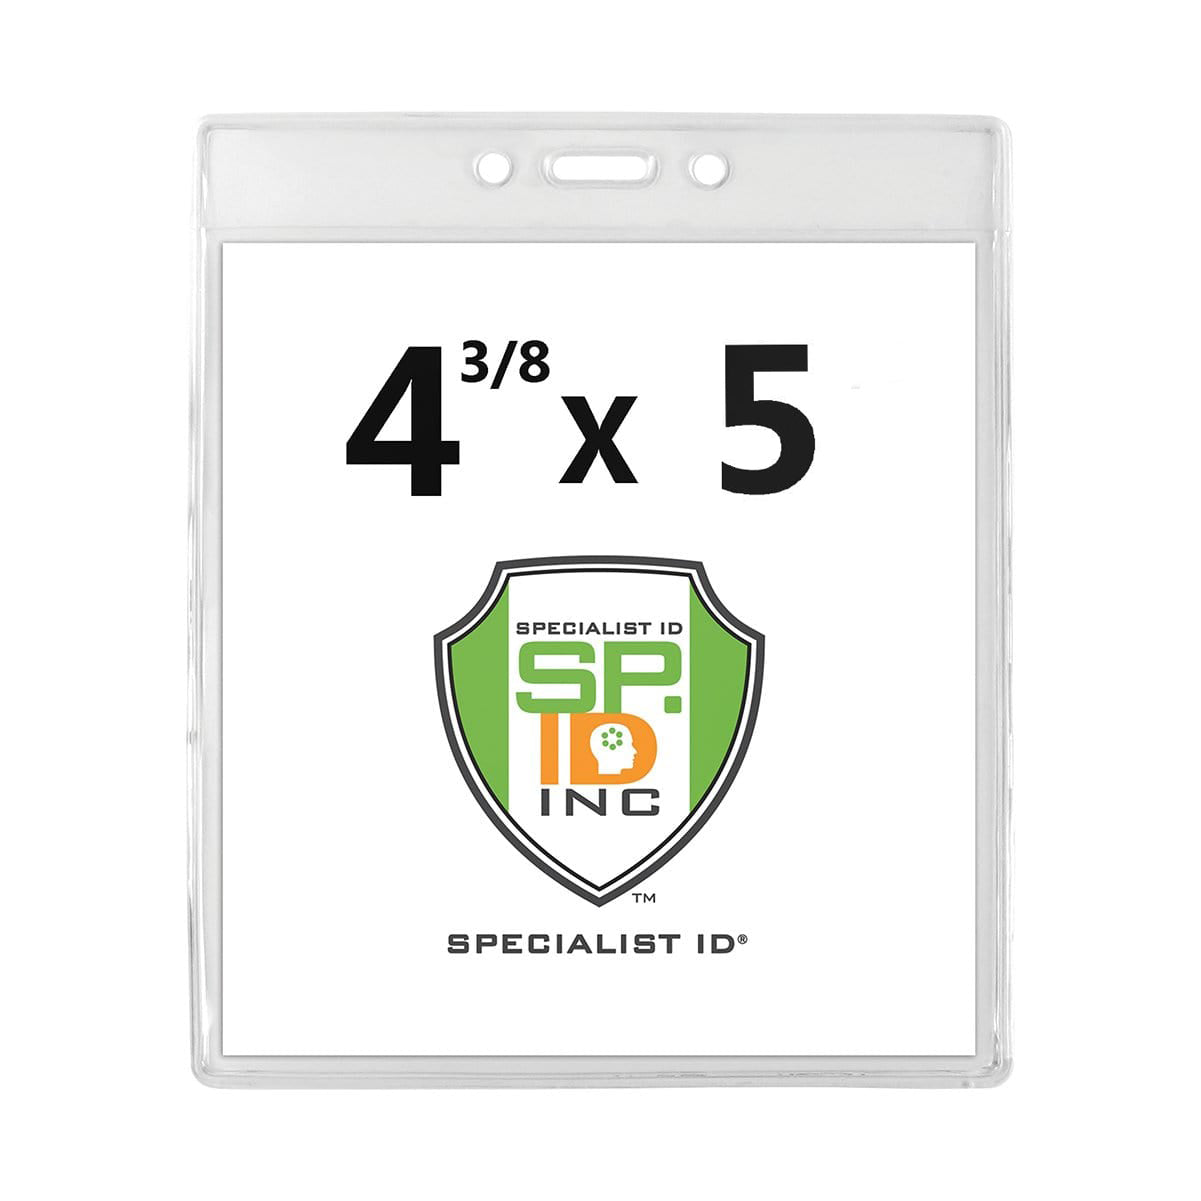 4 3/8 x 5" Clear Vertical Large Event Badge Holder (P/N 306-4755)